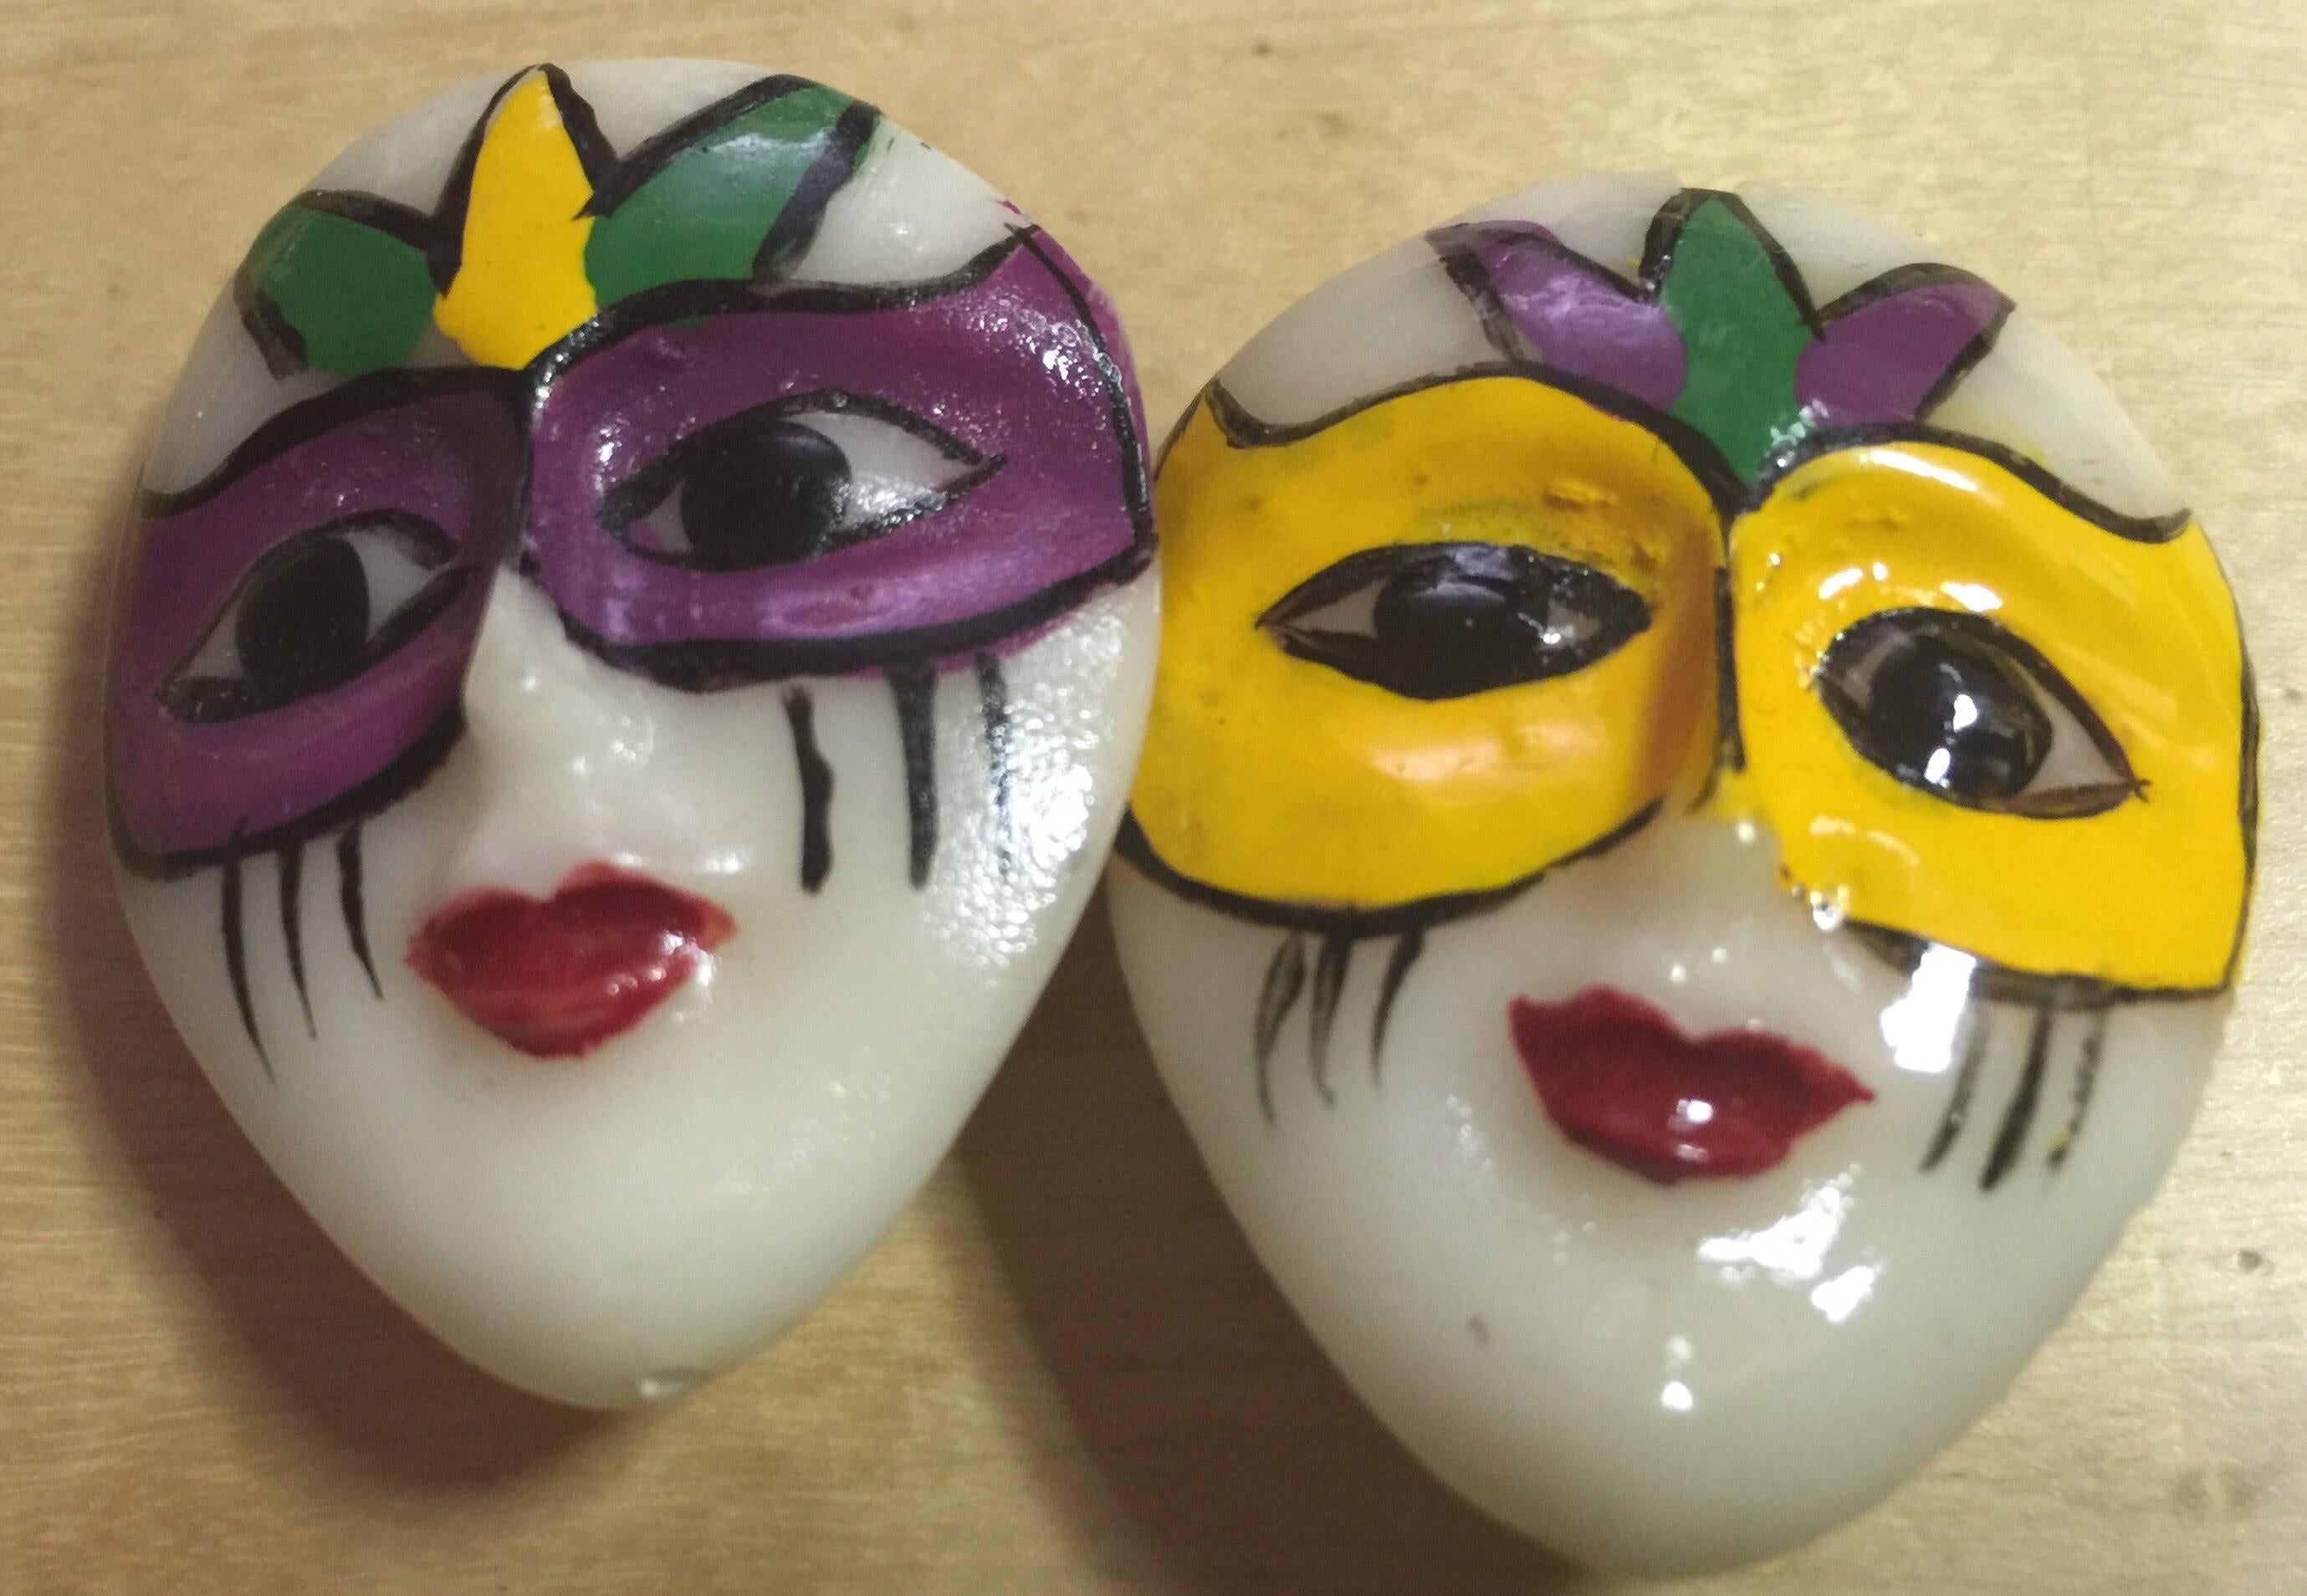 These 5 glossy polished celluloid buttons are of the French phantasmogotic creature PIERROT. Brightly painted and detailed, the masks of color add verve to these whitish coat buttons. Each is 3 dimensional --the same on the front and the rear, and